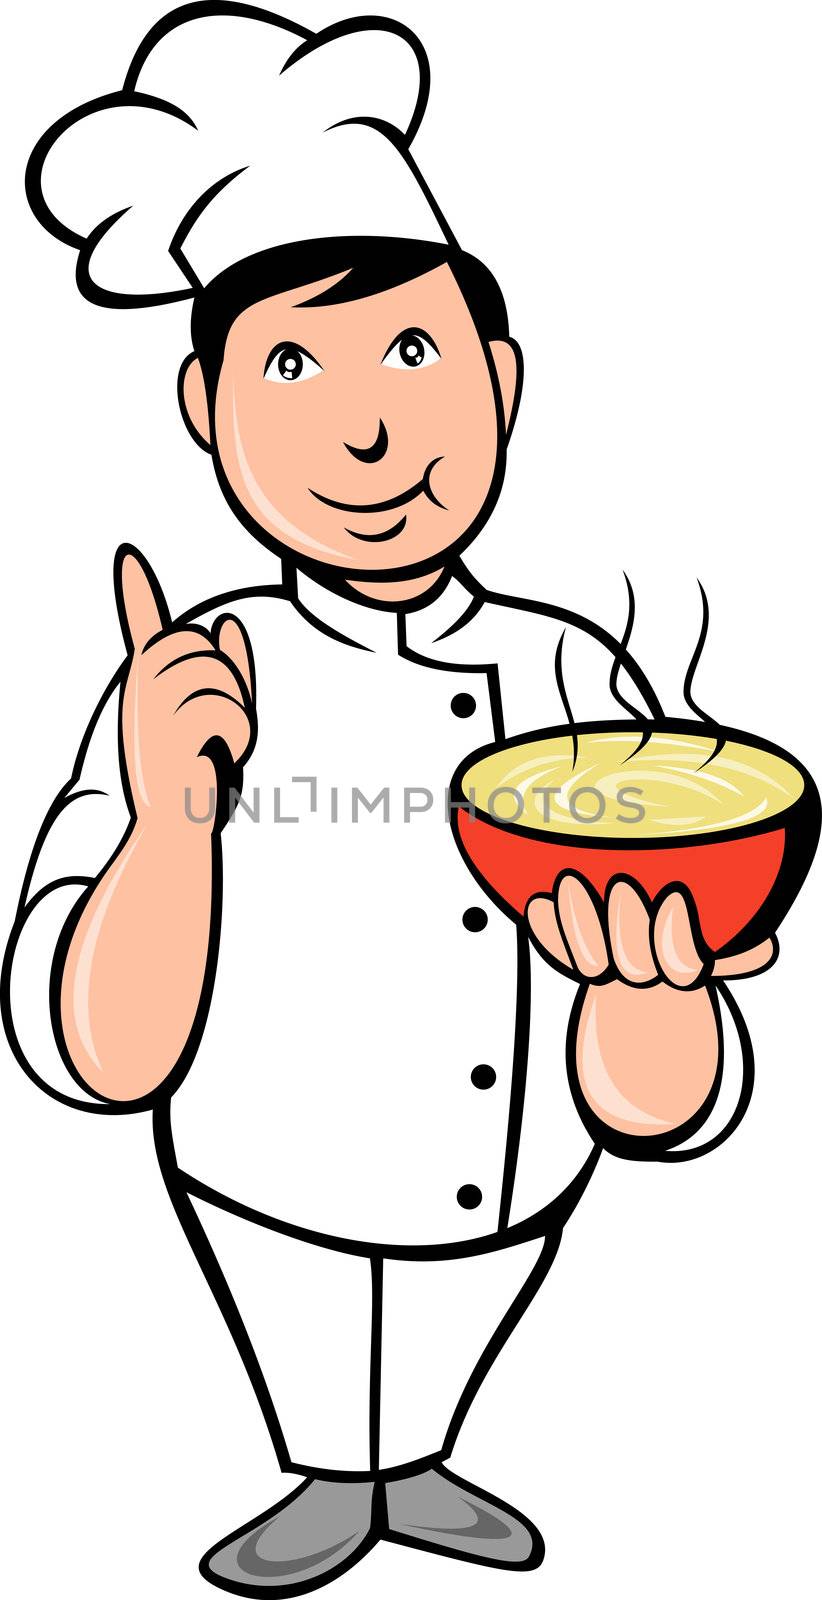  illustration of a Cartoon Chef cook with bowl of soup with hand extended saying number one.